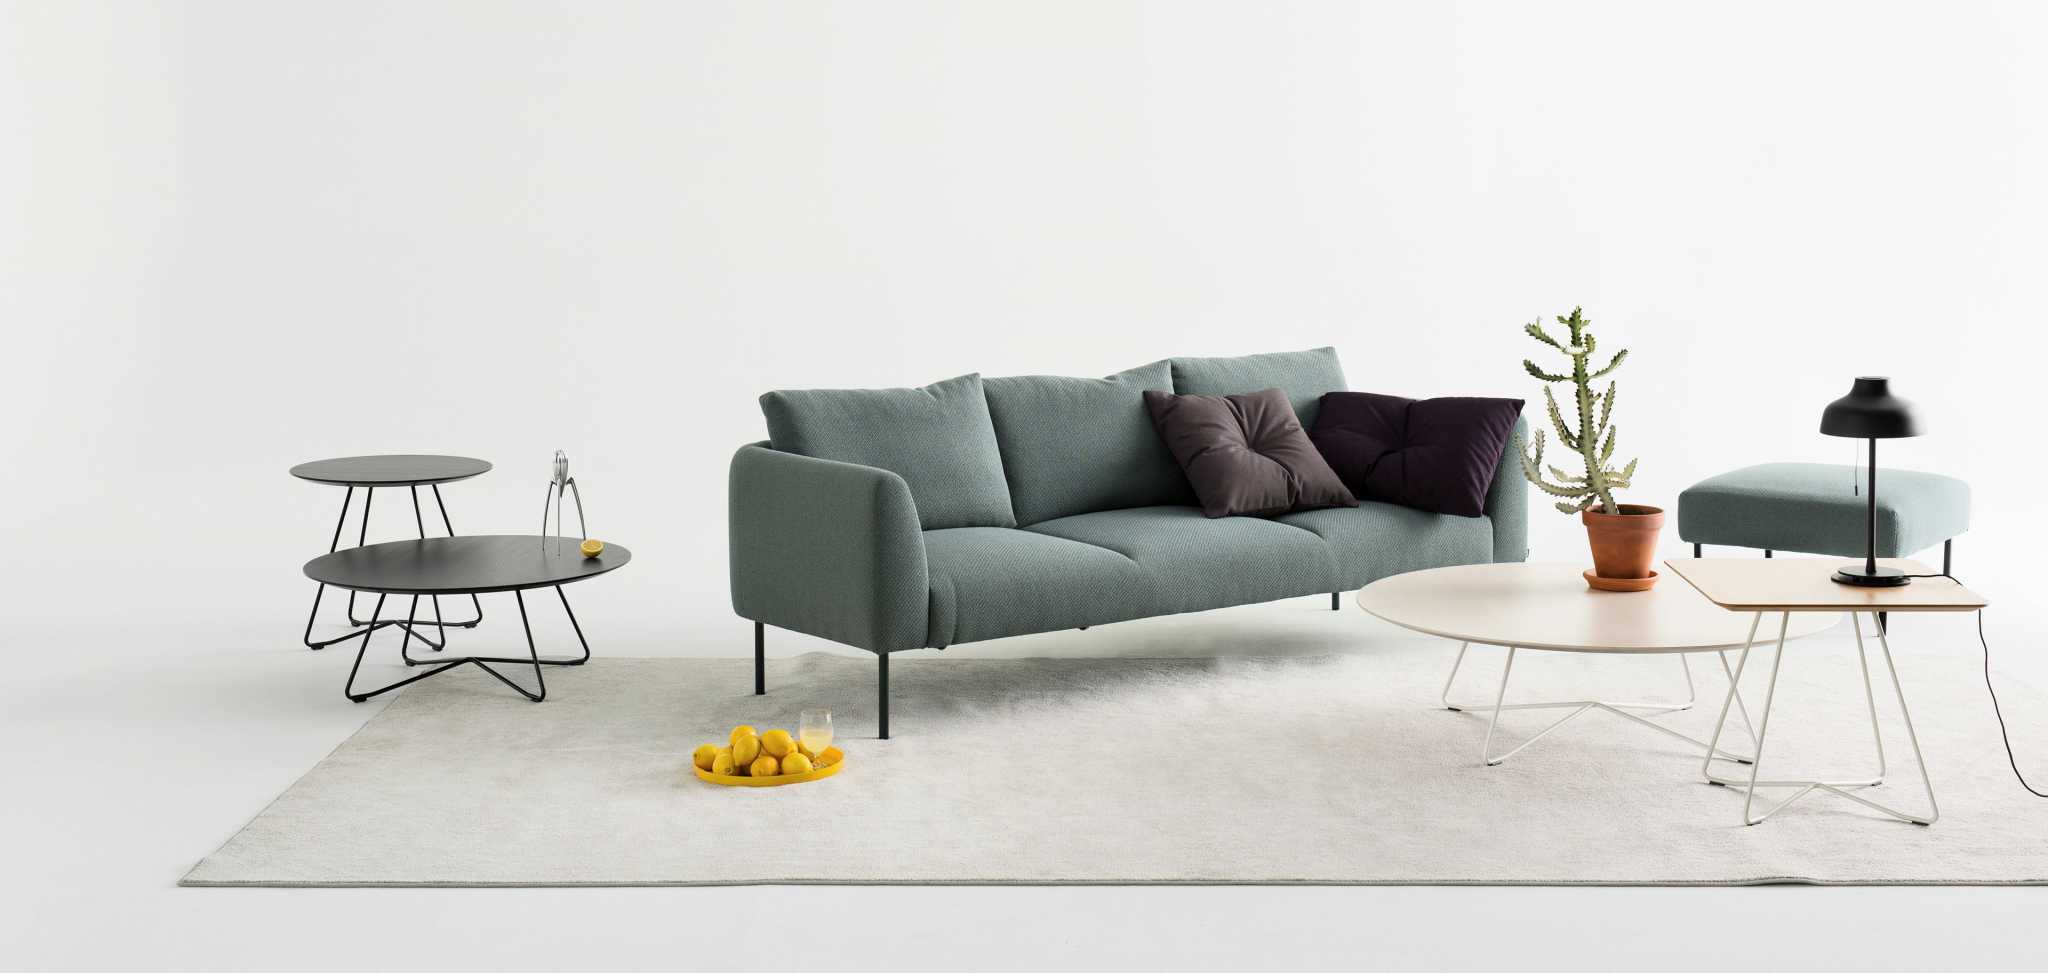 Large grey sofa with a sofa table